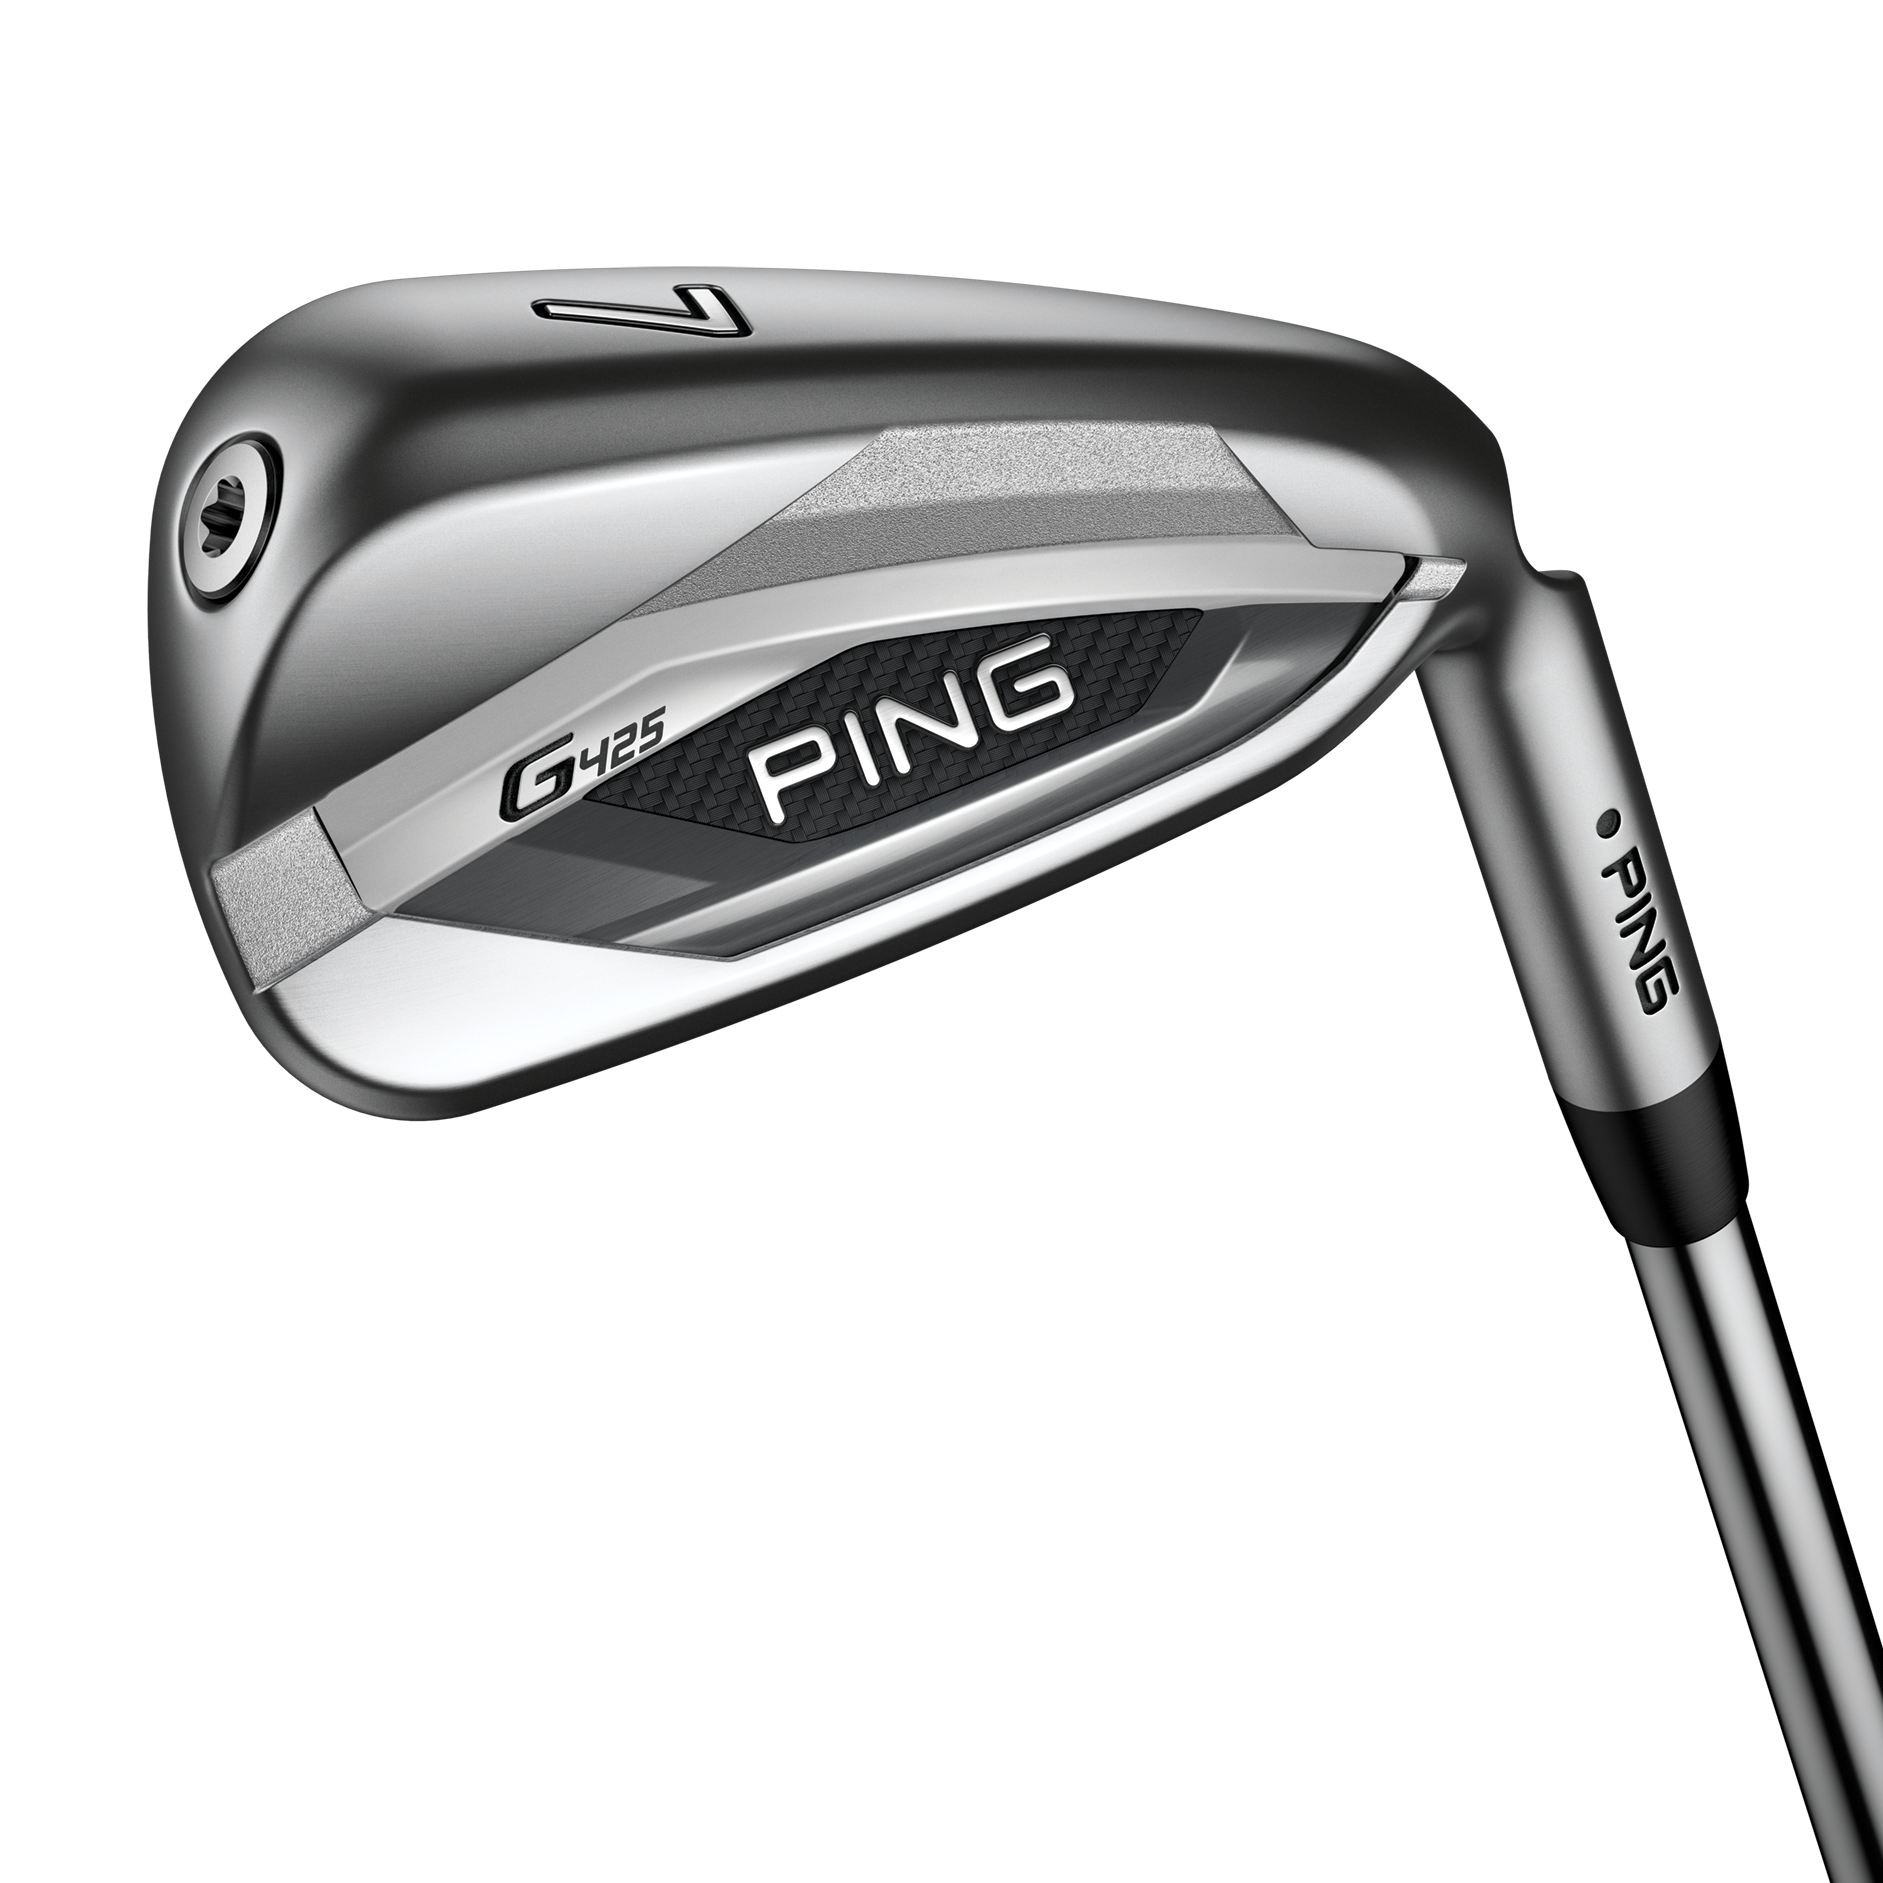 G425 Irons w/ Steel Shafts